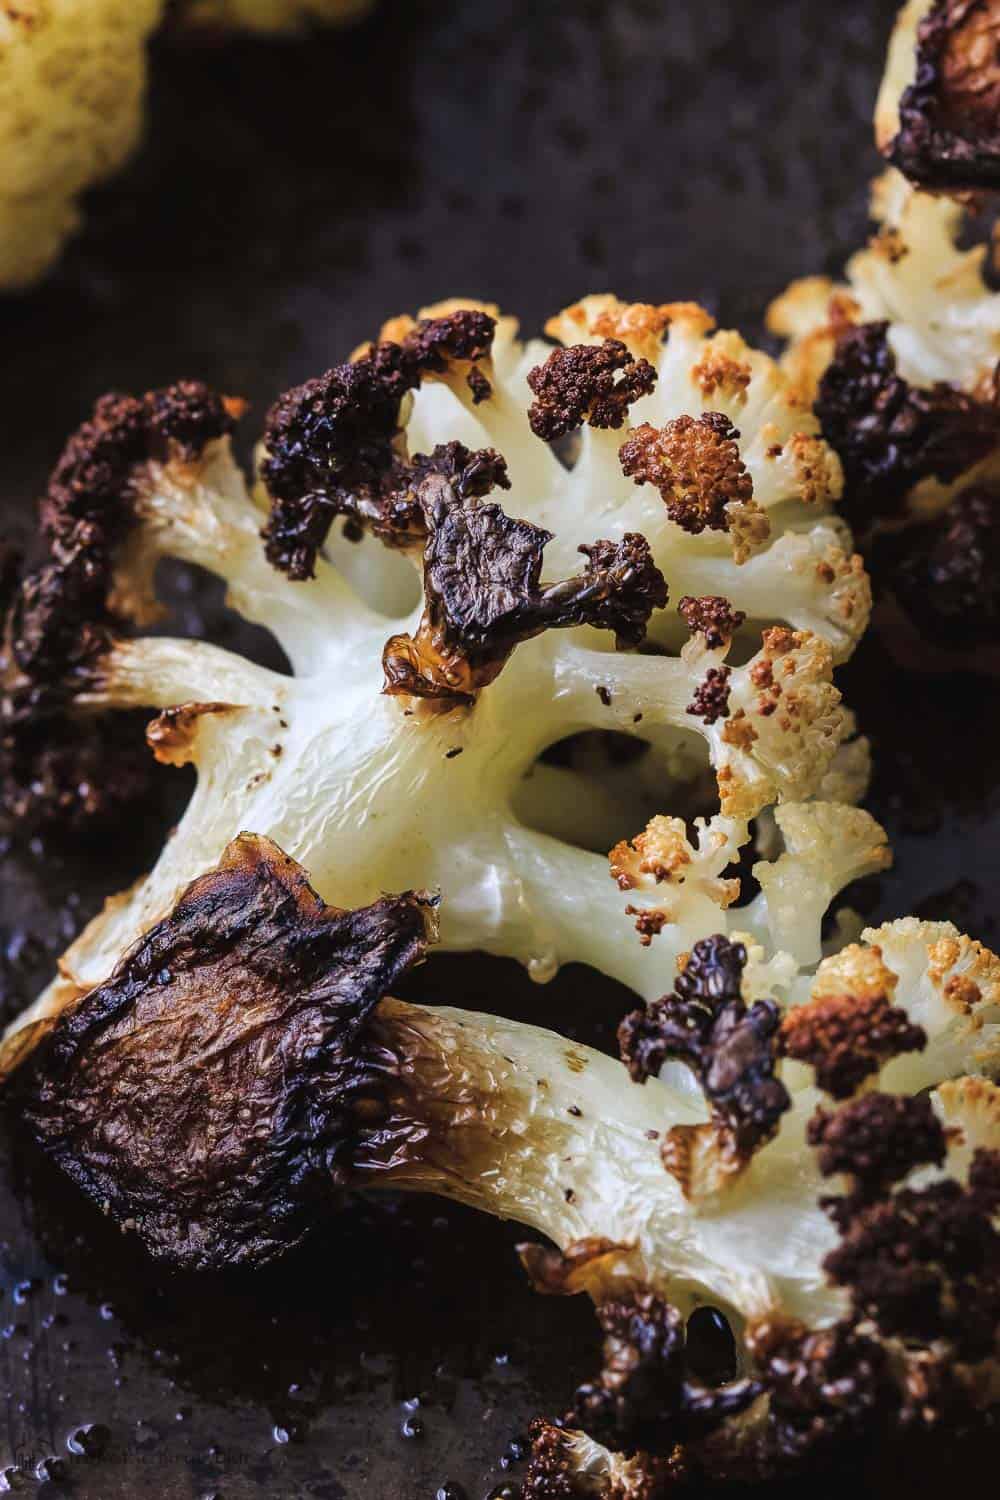 Roasted cauliflower with charred portions